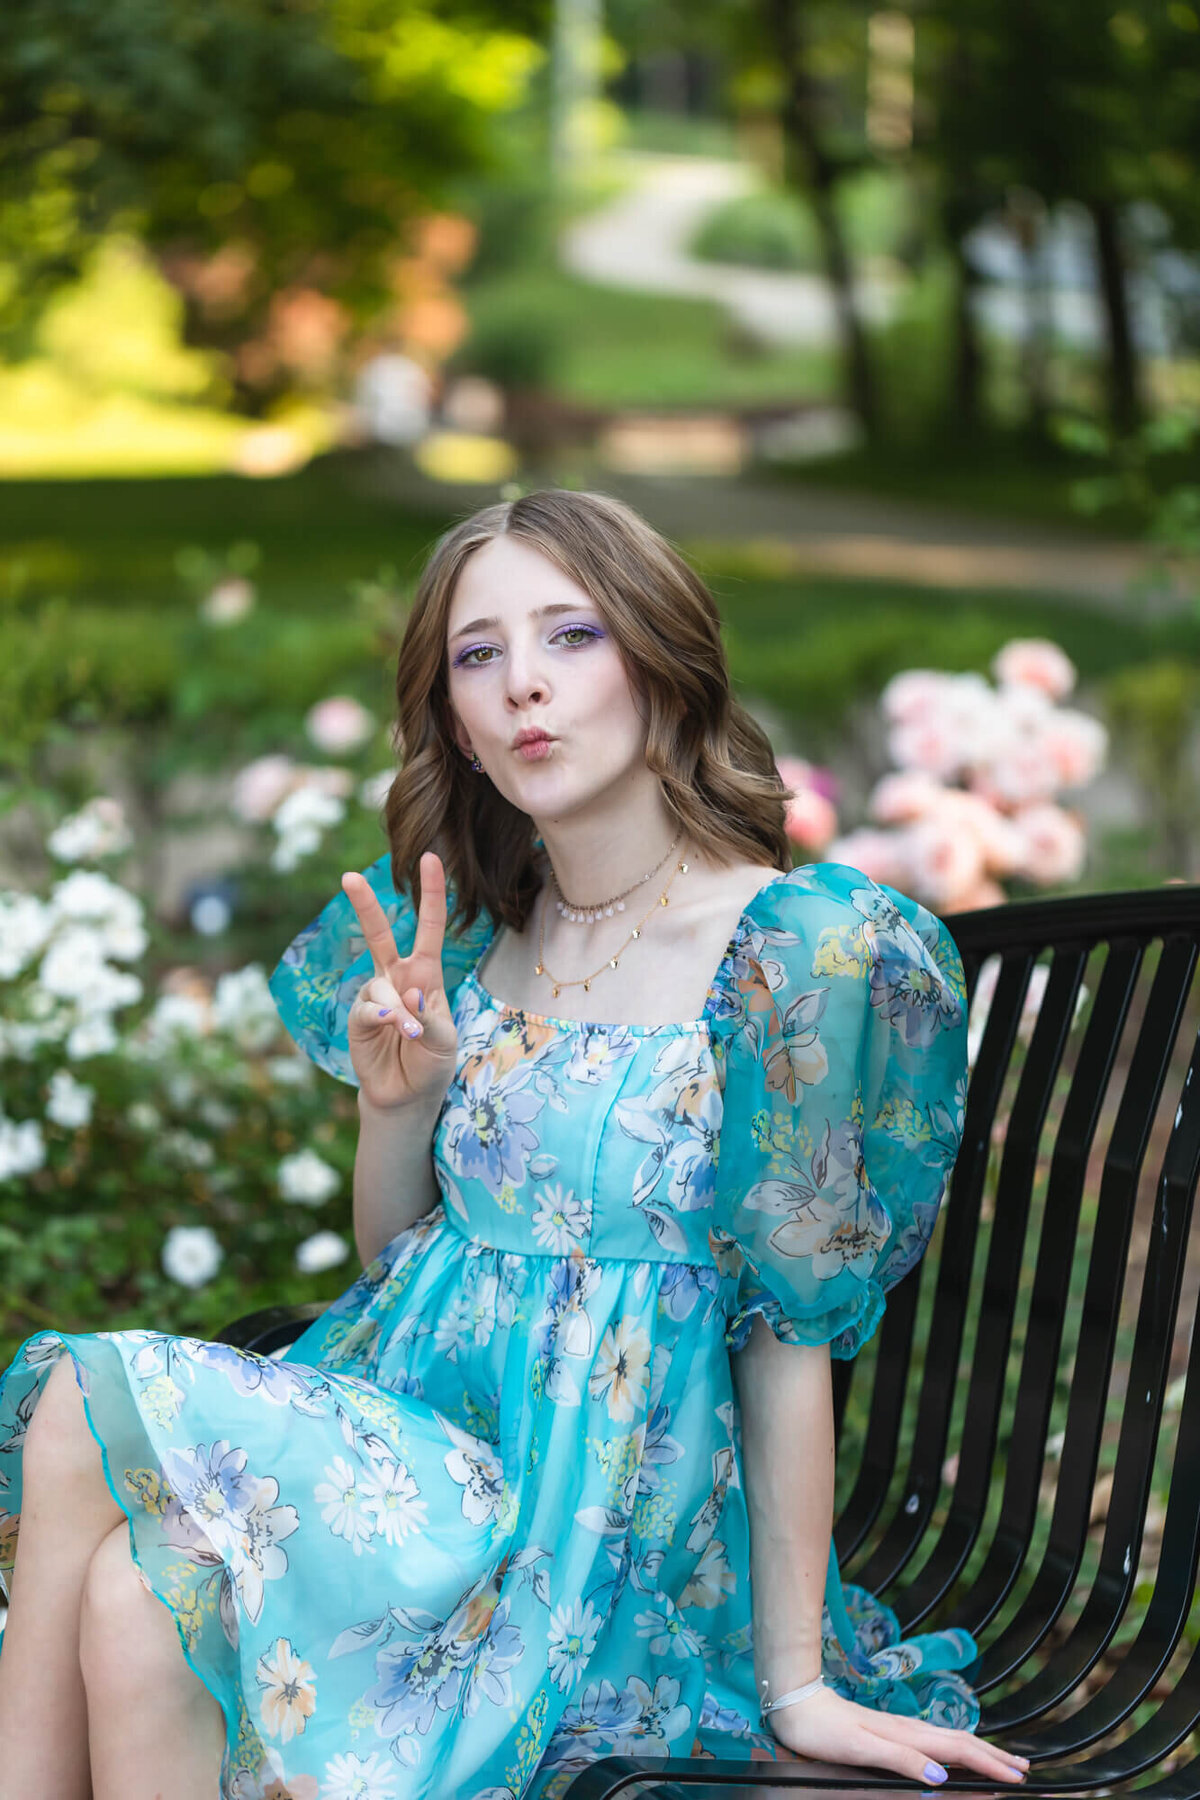 Fun portrait of a young teen girl in a floral blue dress throwing up the peace sign in a flower garden. Captured by Springfield, MO teen photographer Dynae Levingston.